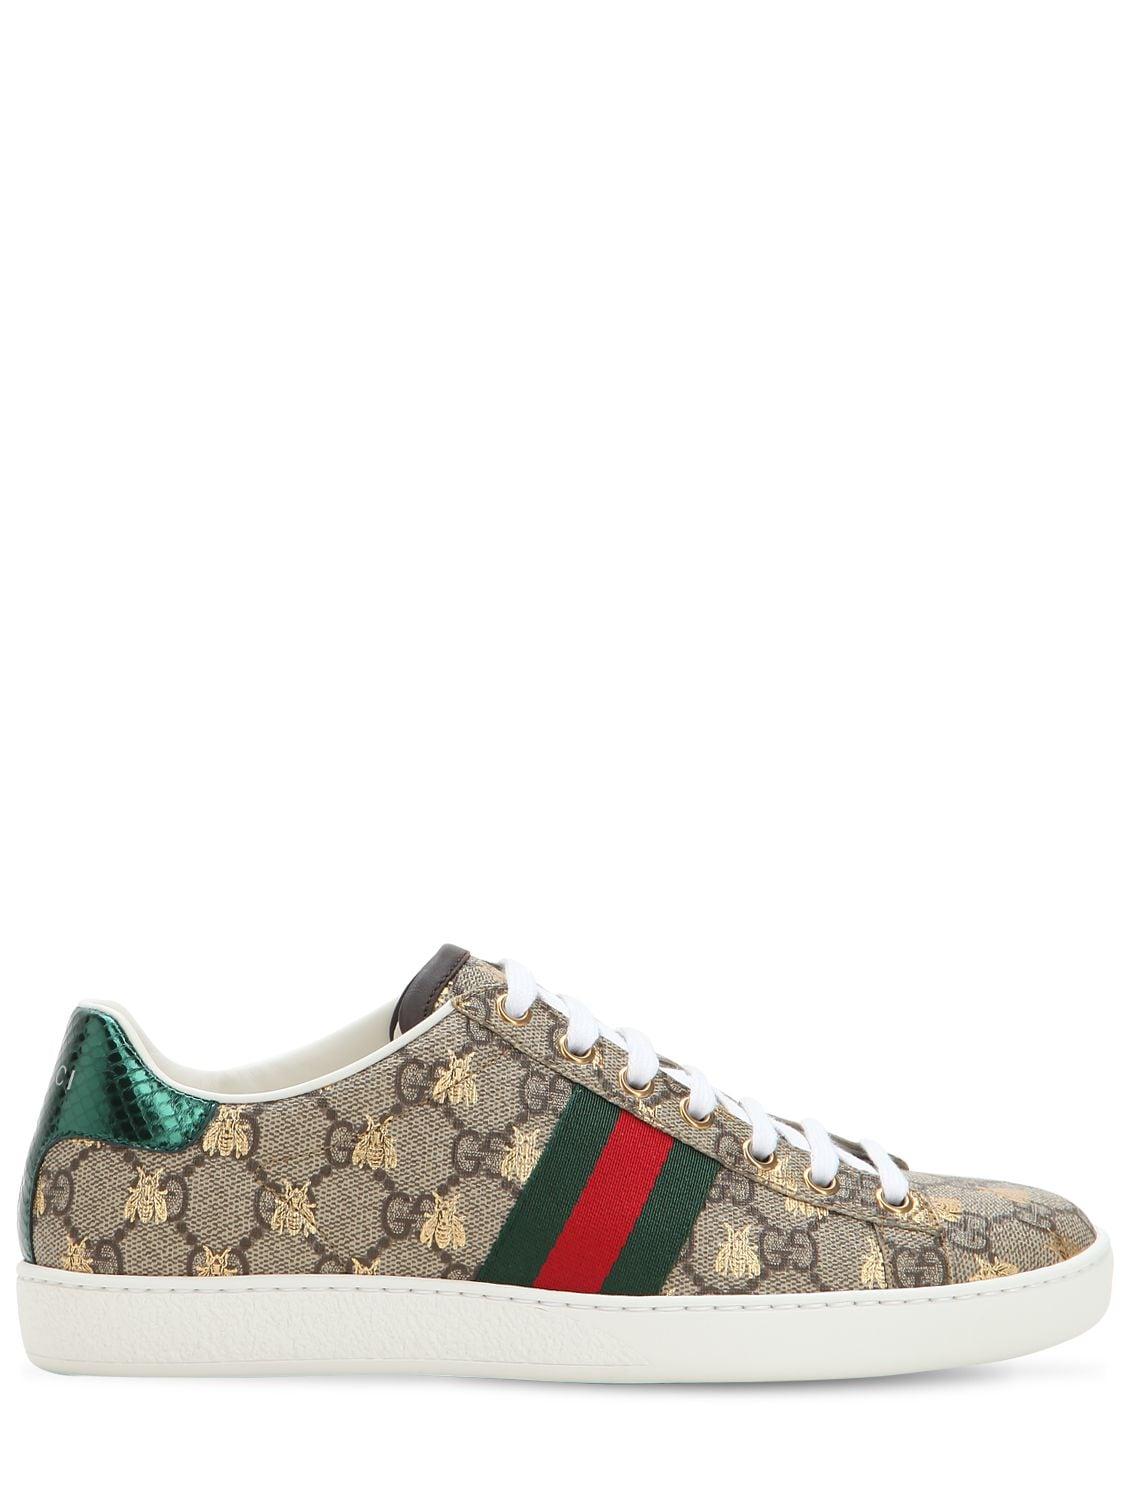 Gucci Gg Canvas New Ace Sneakes in Beige (Natural) - Save 45 